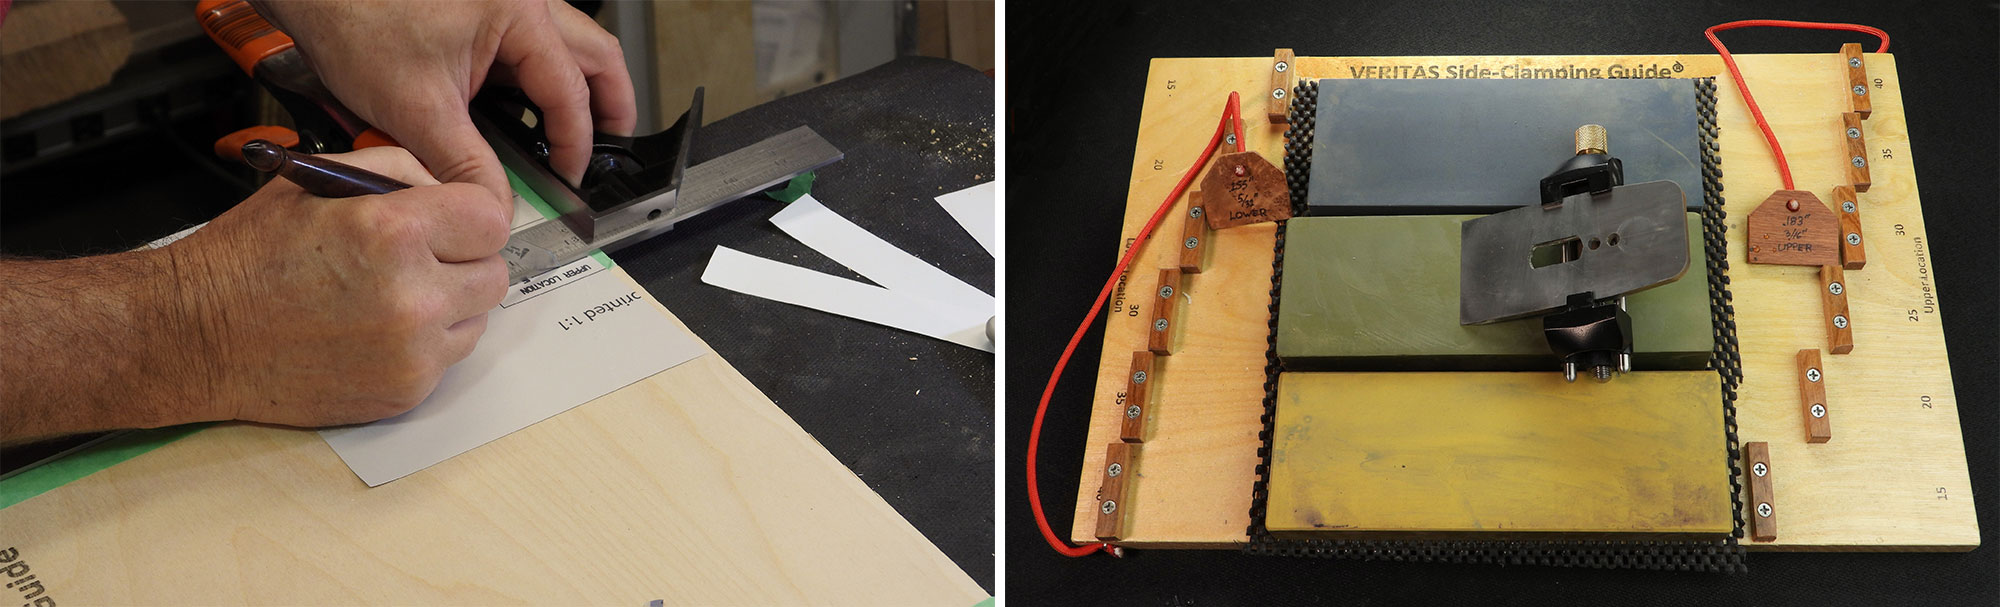 Image left: Marking the stop block locations. Image right: Stop-style jig with glued blocks.